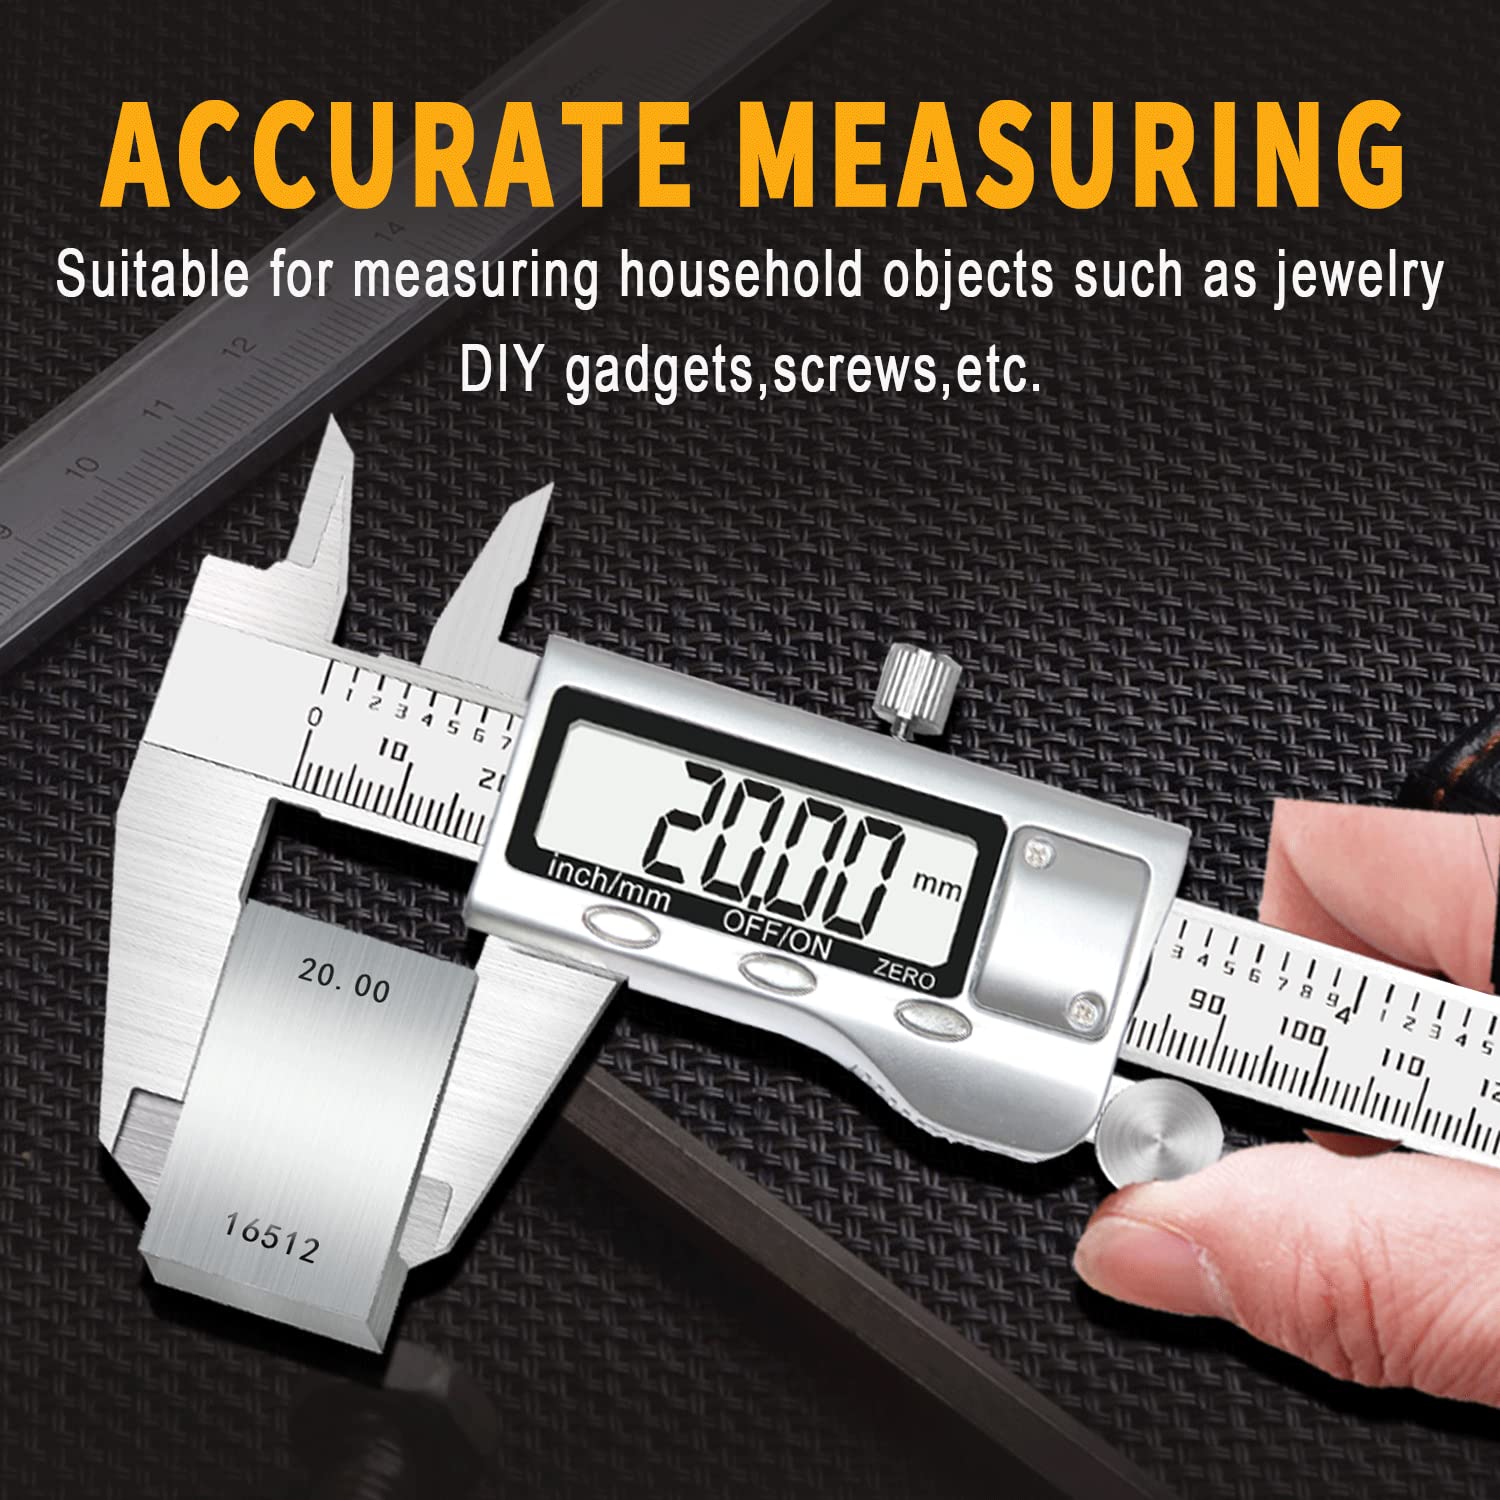 Digital Caliper 6 Inch Measuring Tool Stainless Steel Vernier Caliper Digital Micrometer with Large LCD Screen,Auto-Off Feature, Inch/Metric Conversion Measuring Tool Caliper